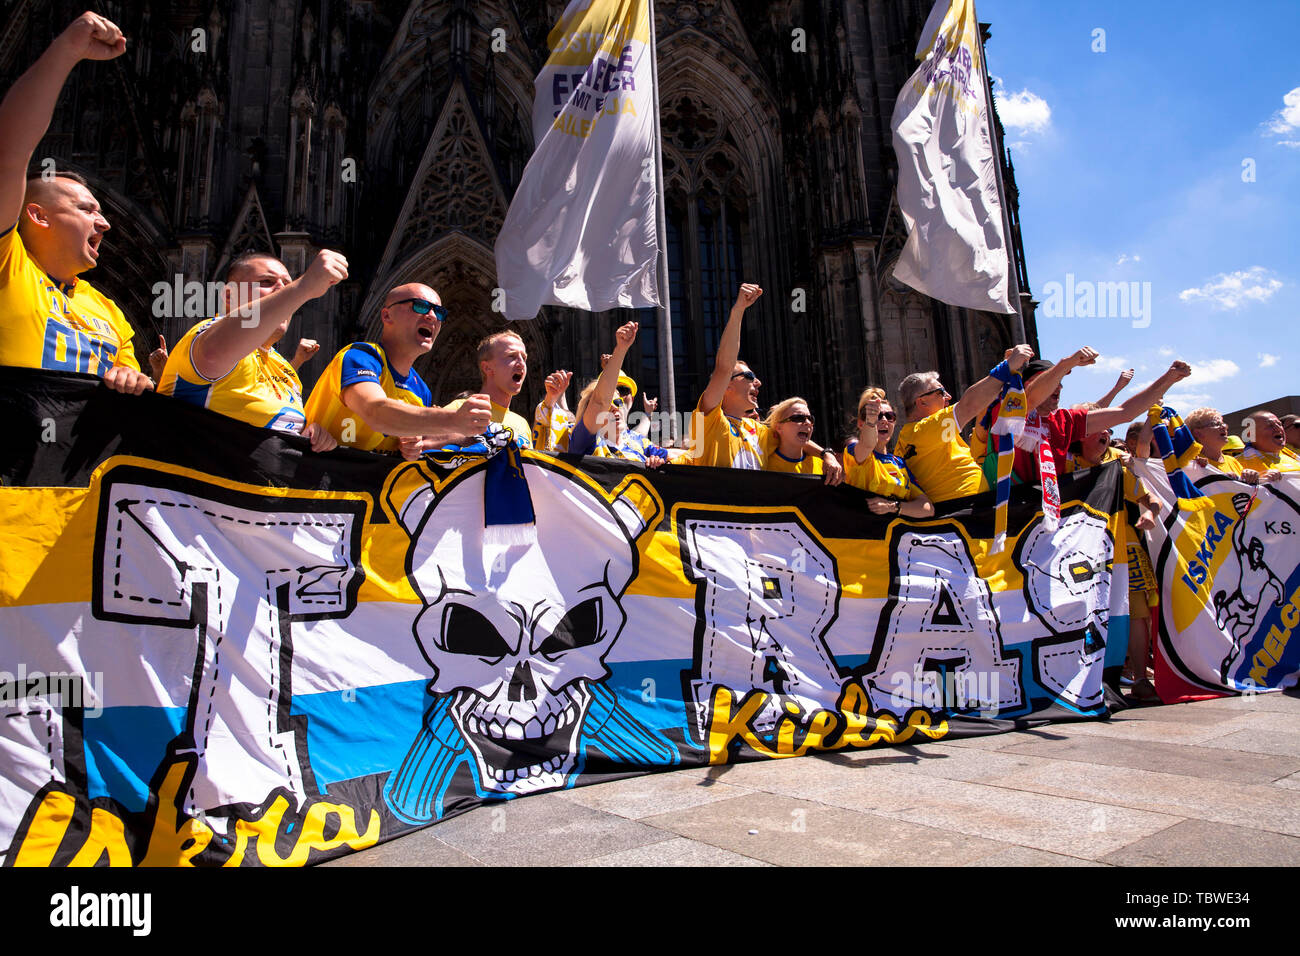 fans of the Polish handball club KS Kielce celebrate during the EHF Champions League Final in front of the cathedral, Cologne, Germany.  Fans des poln Stock Photo